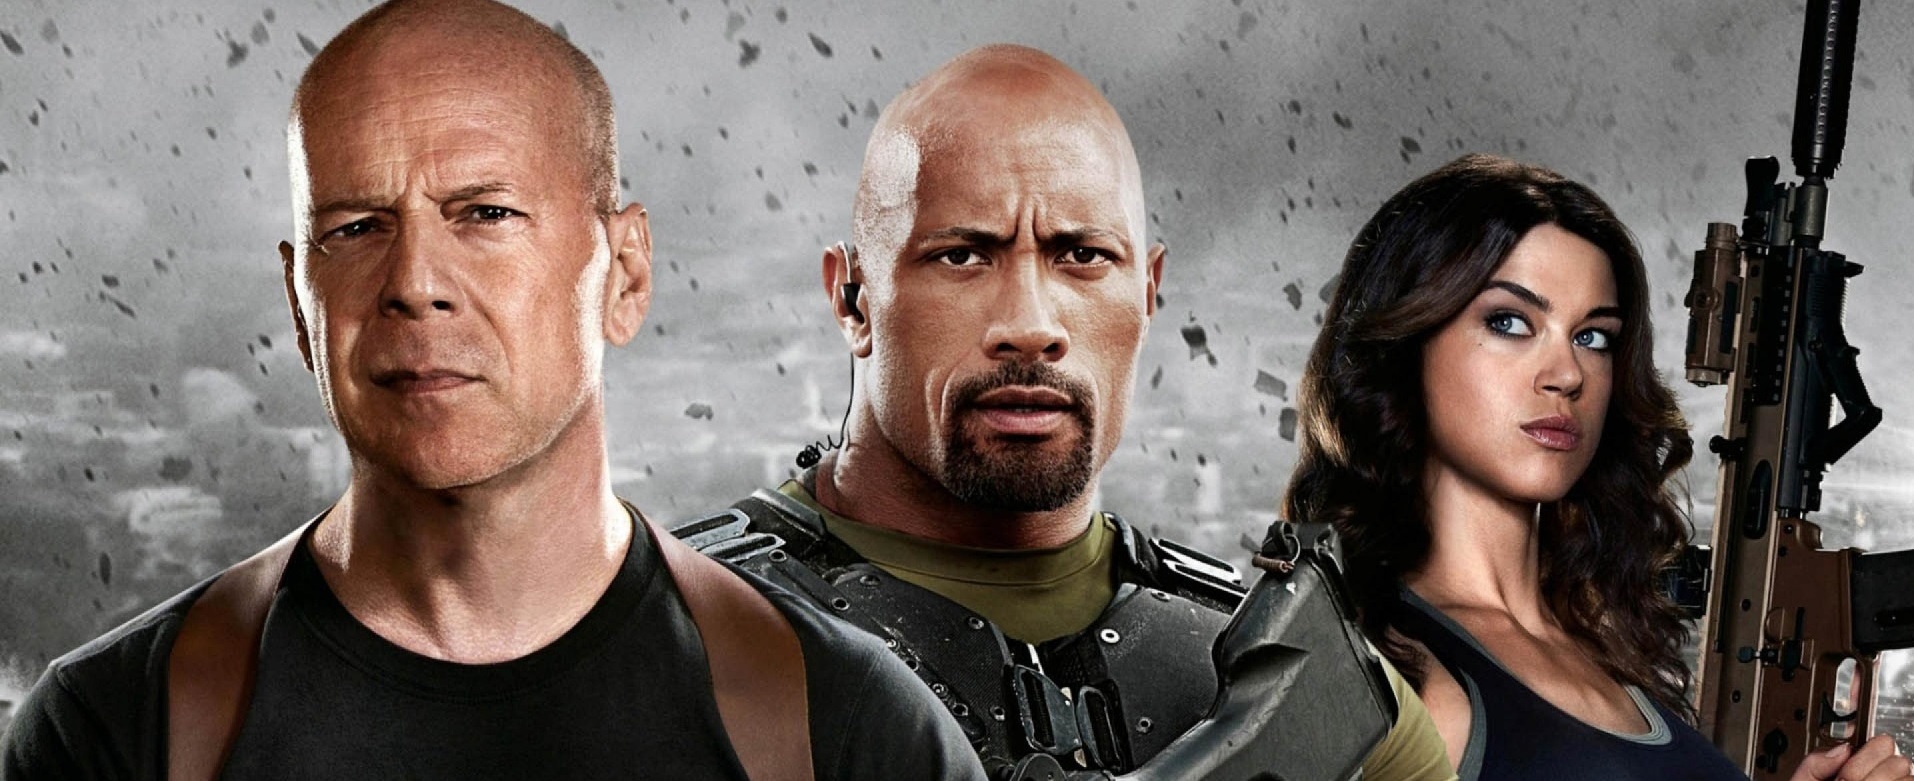 Archived: Review: G.I. Joe: Retaliation (2013) - archived